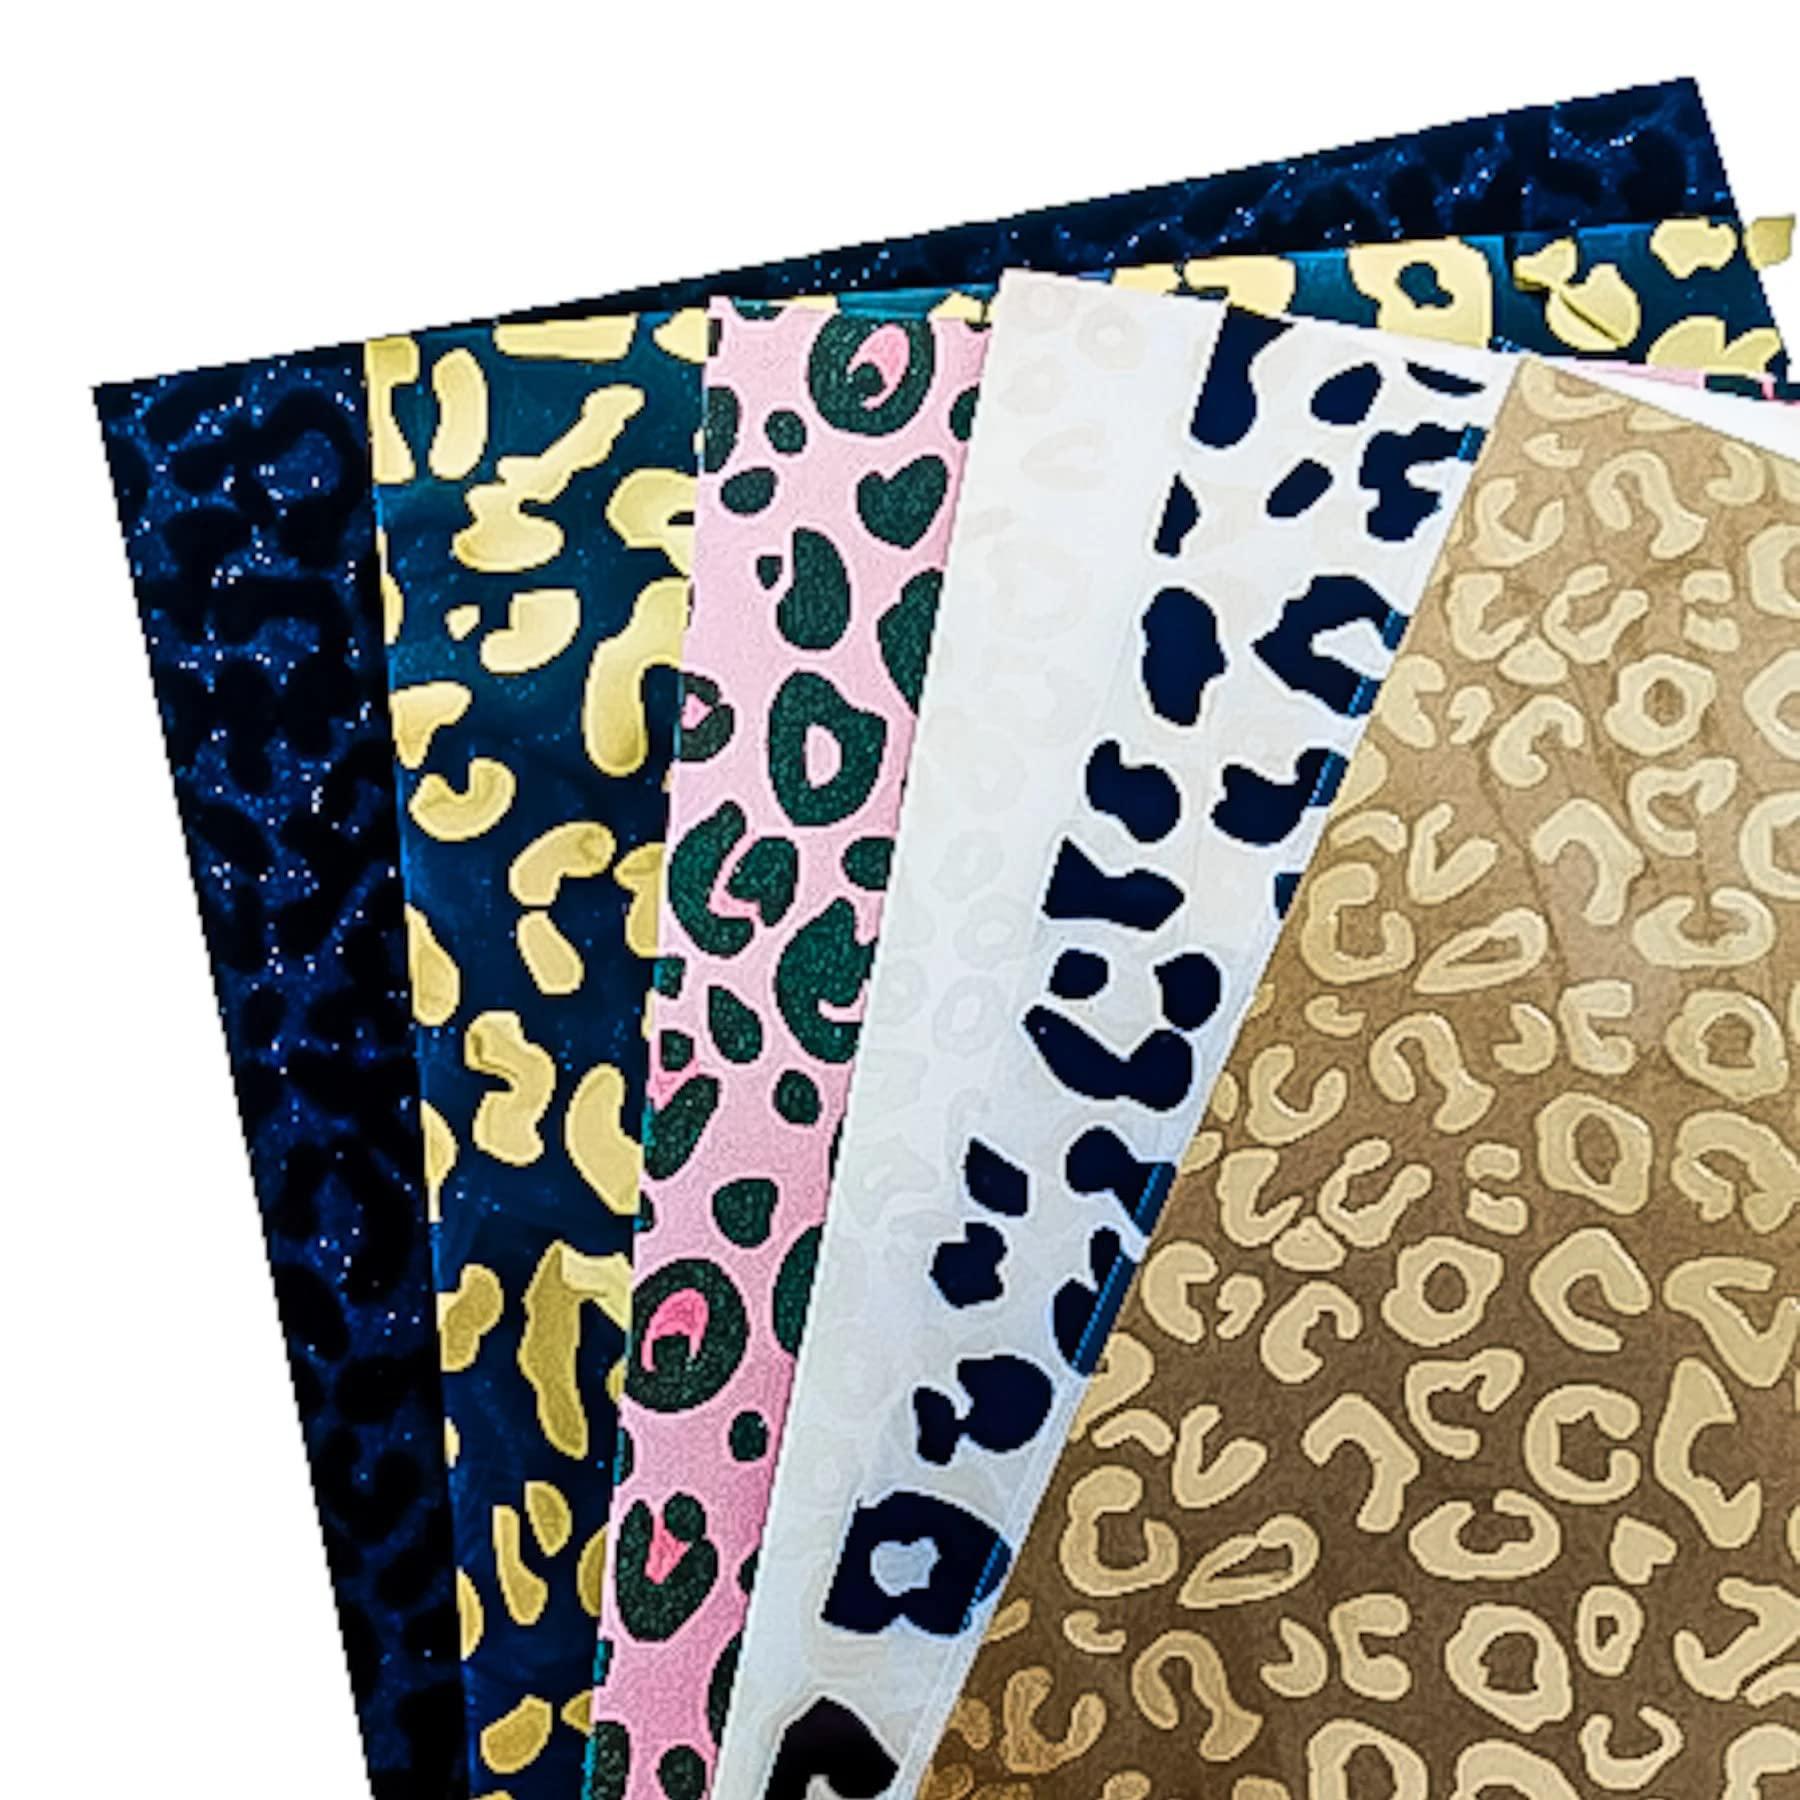 12x12 cardstock shop cheetahs & leopards - variety pack cardstock (pack of  6), 12x12 cardstock paper - assorted colors, patterned mixed media craf